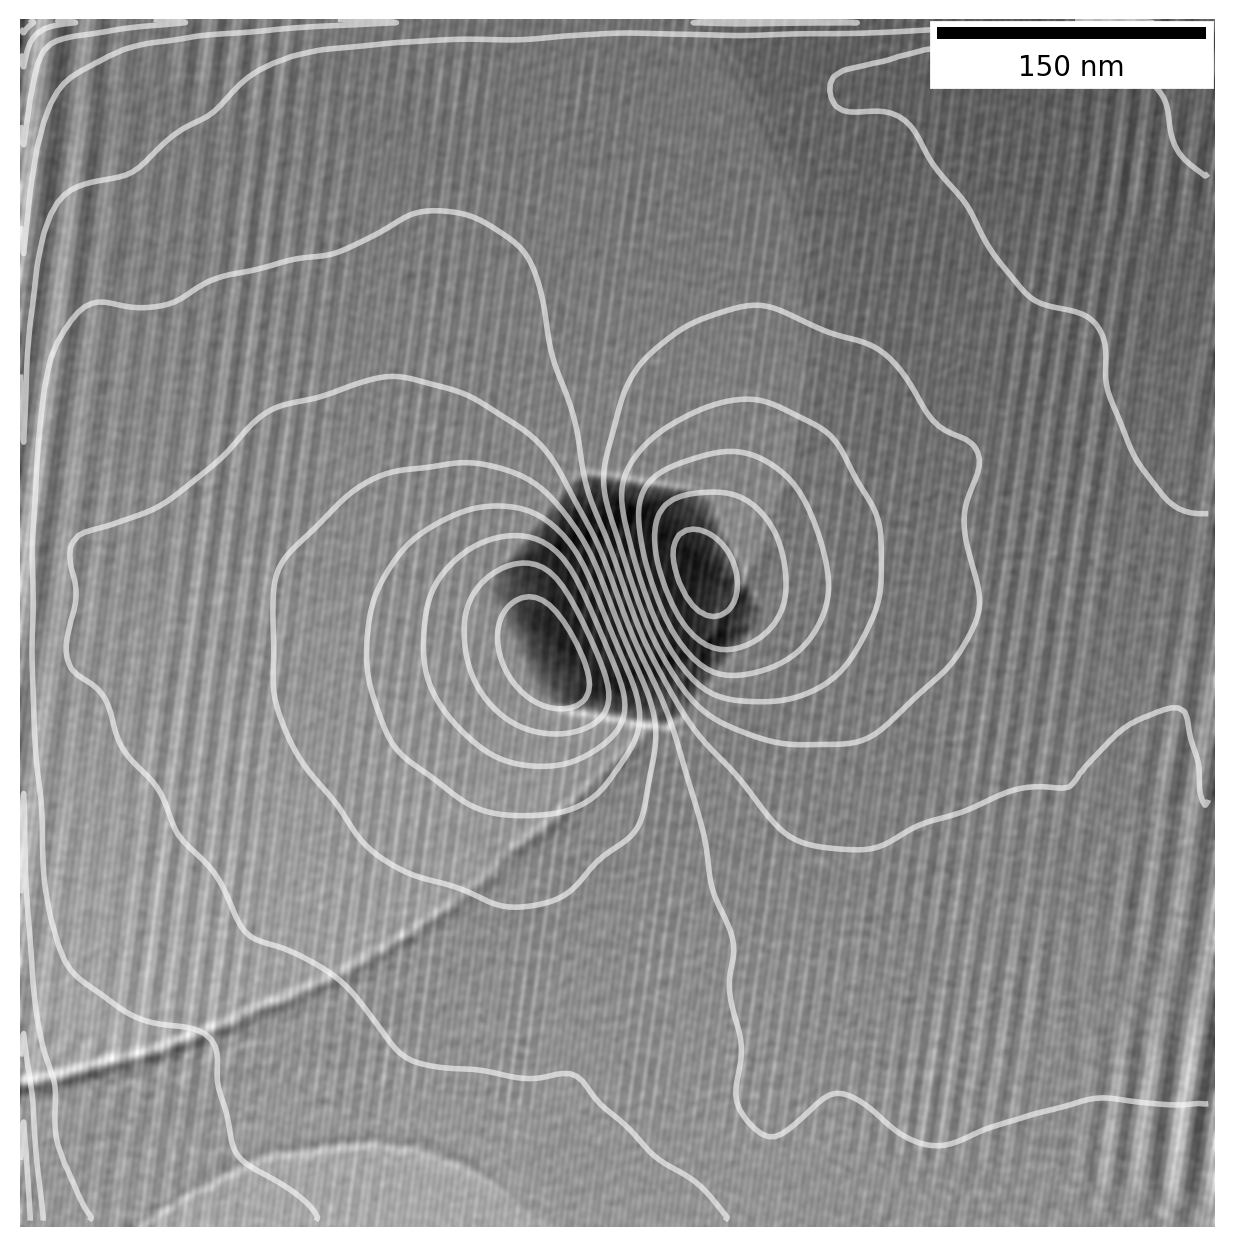 Magnetic contour lines overlayed on bright field image